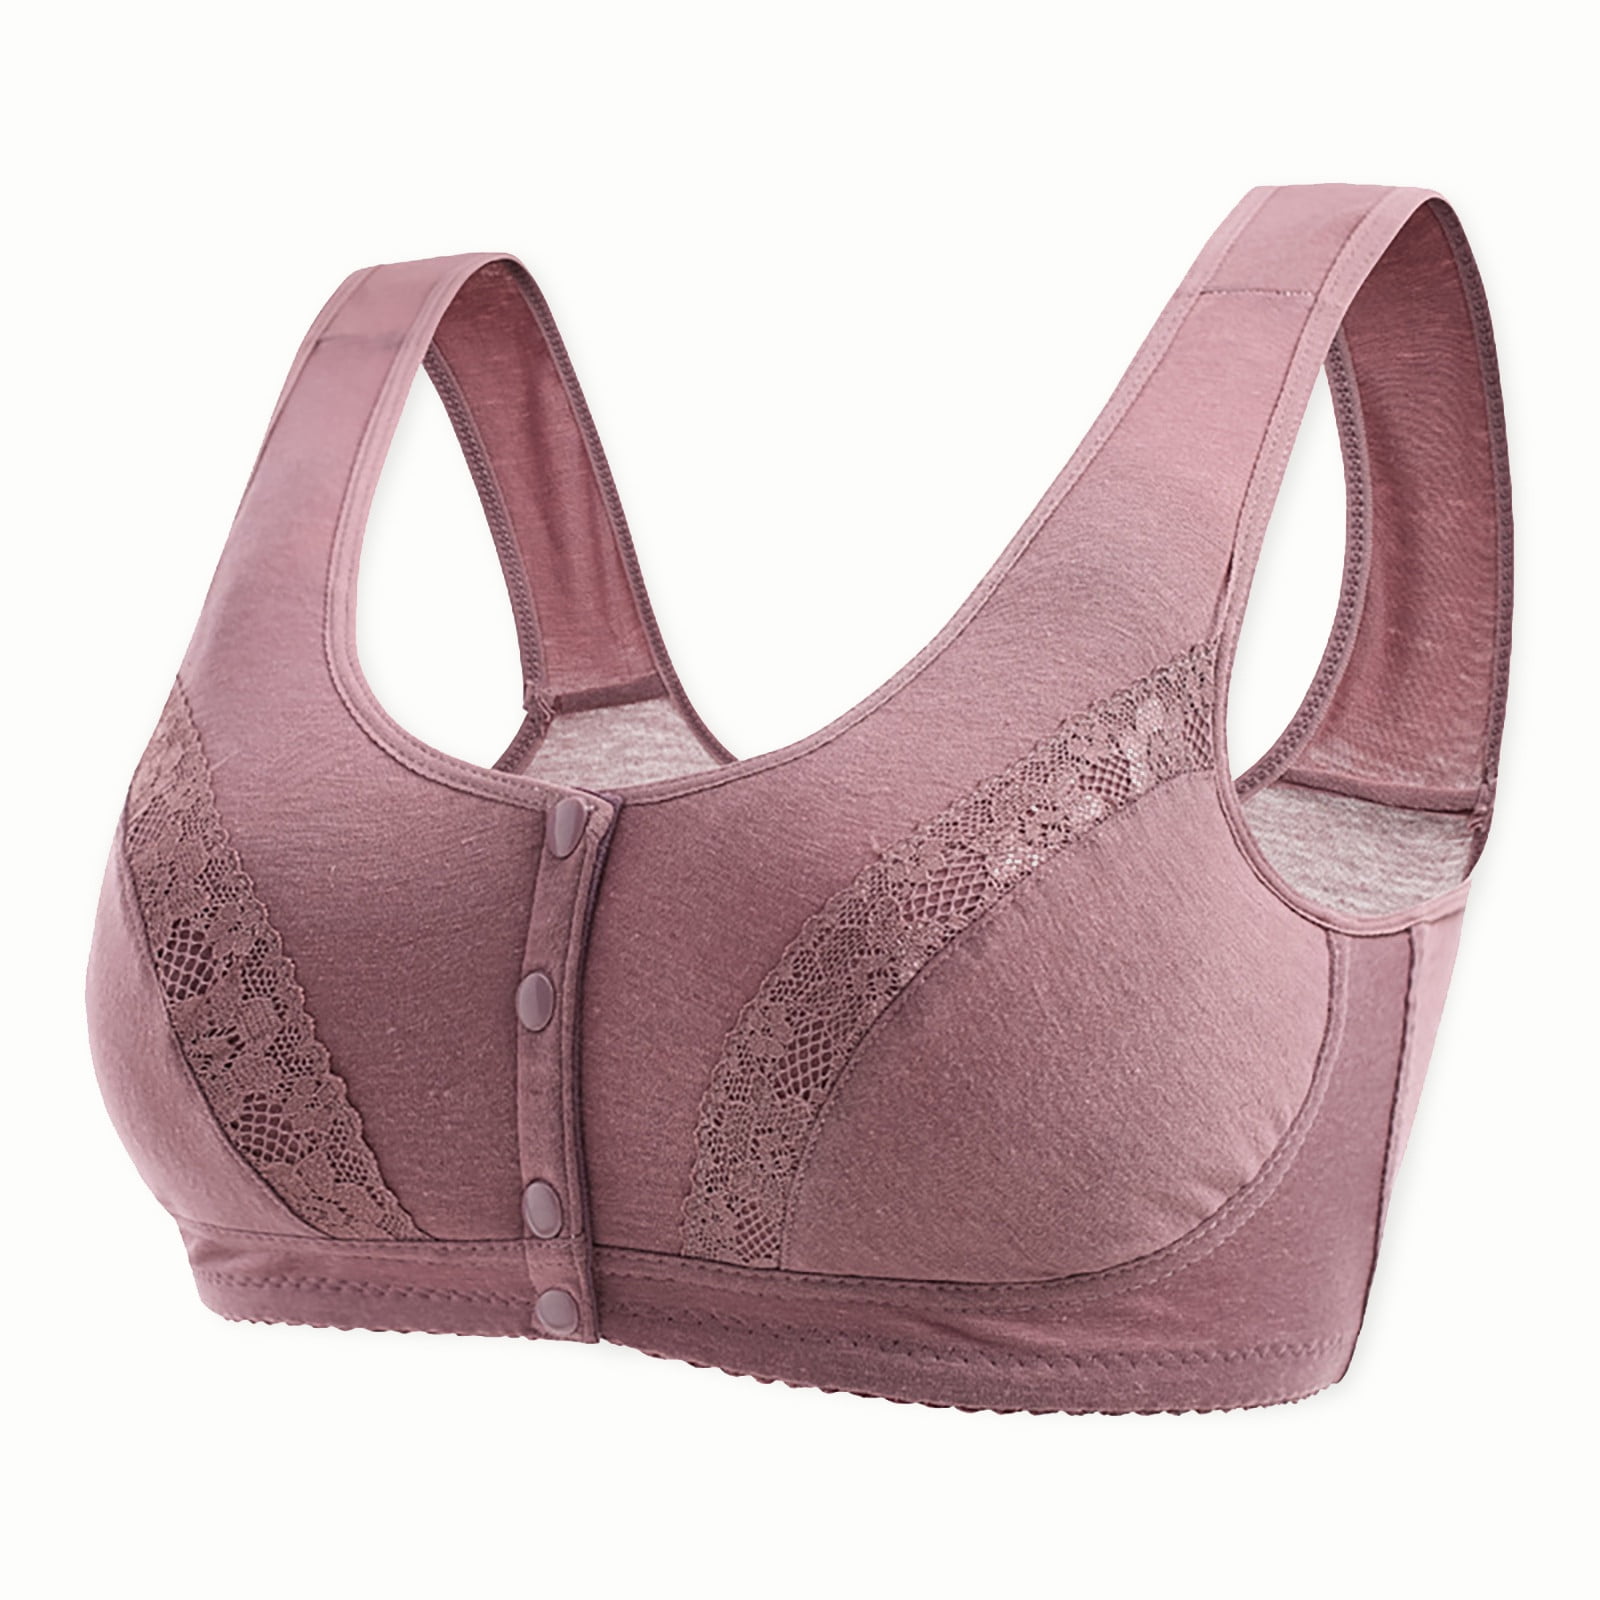 ZORQ Front Snaps Full Coverage Bras for Women, Convenient Front